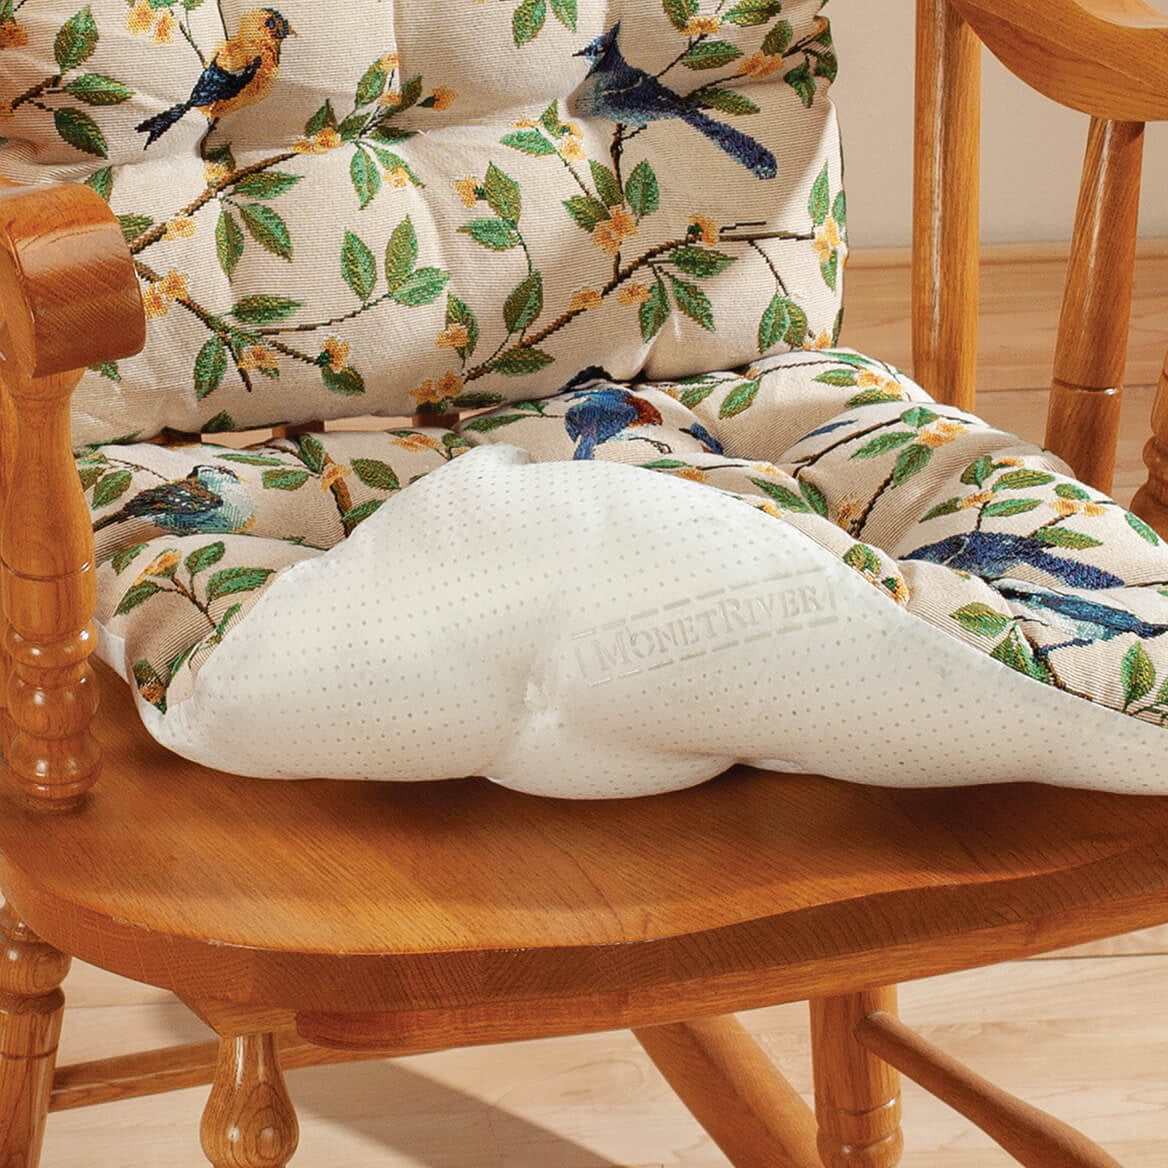 Tapestry Rocking Chair Cushion Set by OakRidge, 2 Piece Set, Floral Design